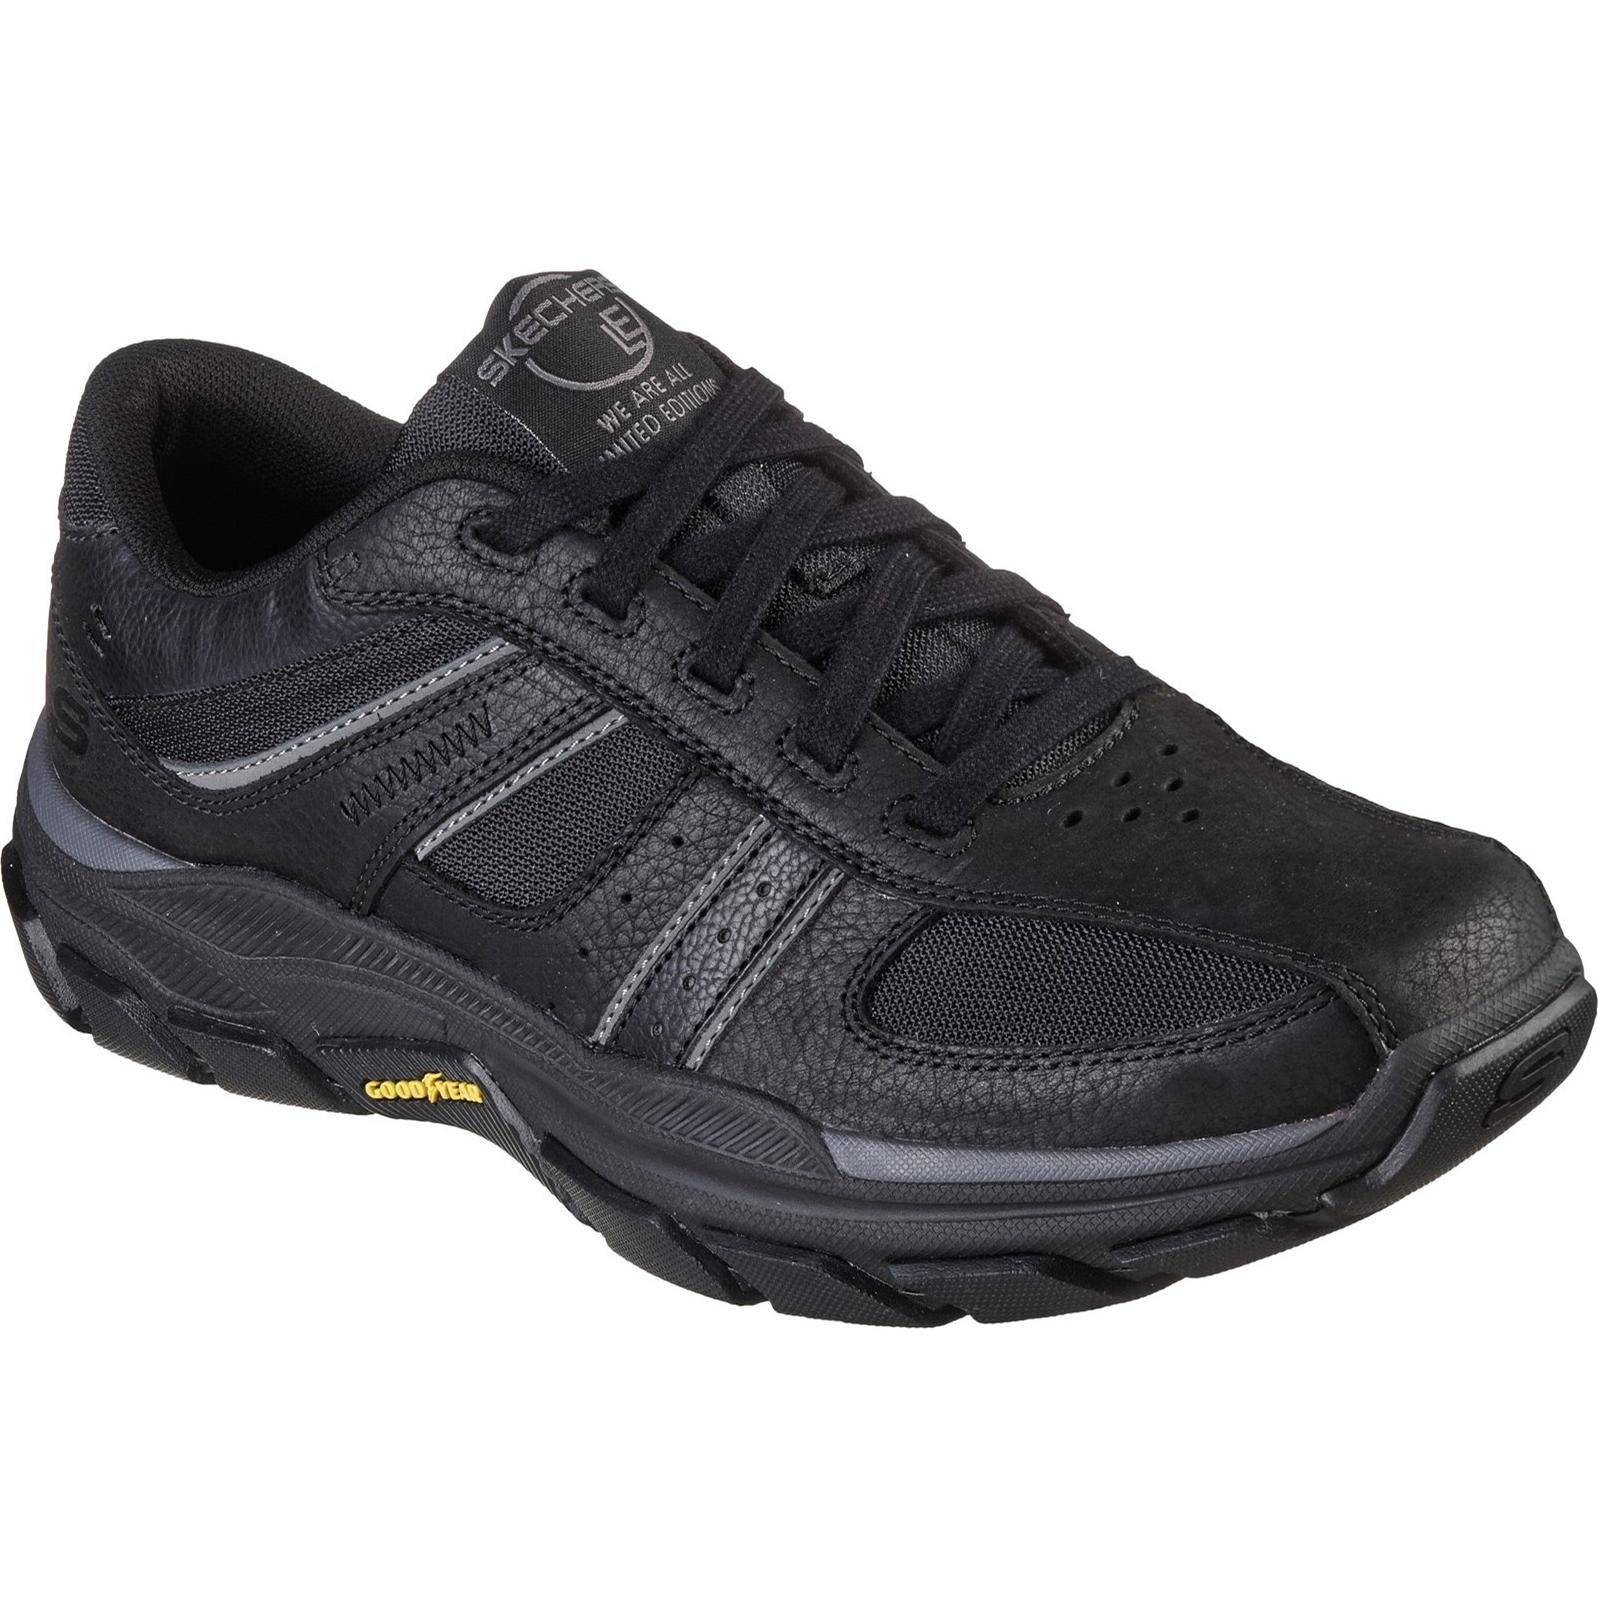 Skechers Respected Lace Shoes